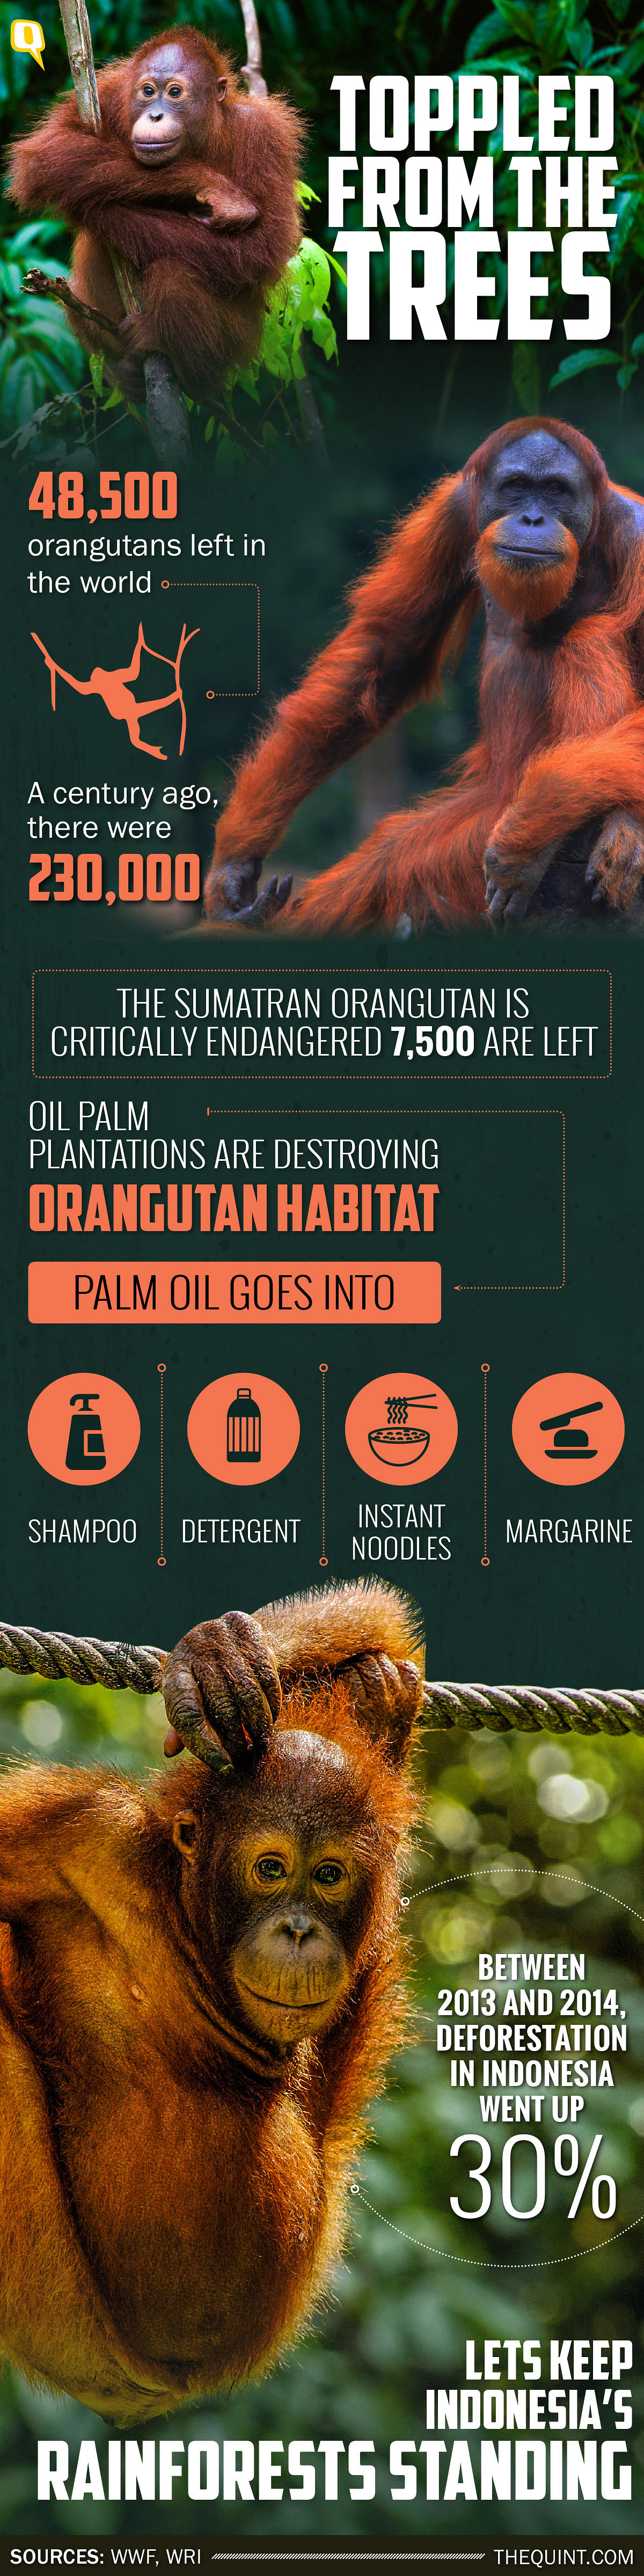 The world’s dependence on palm oil is killing orangutans by the tens of thousands.